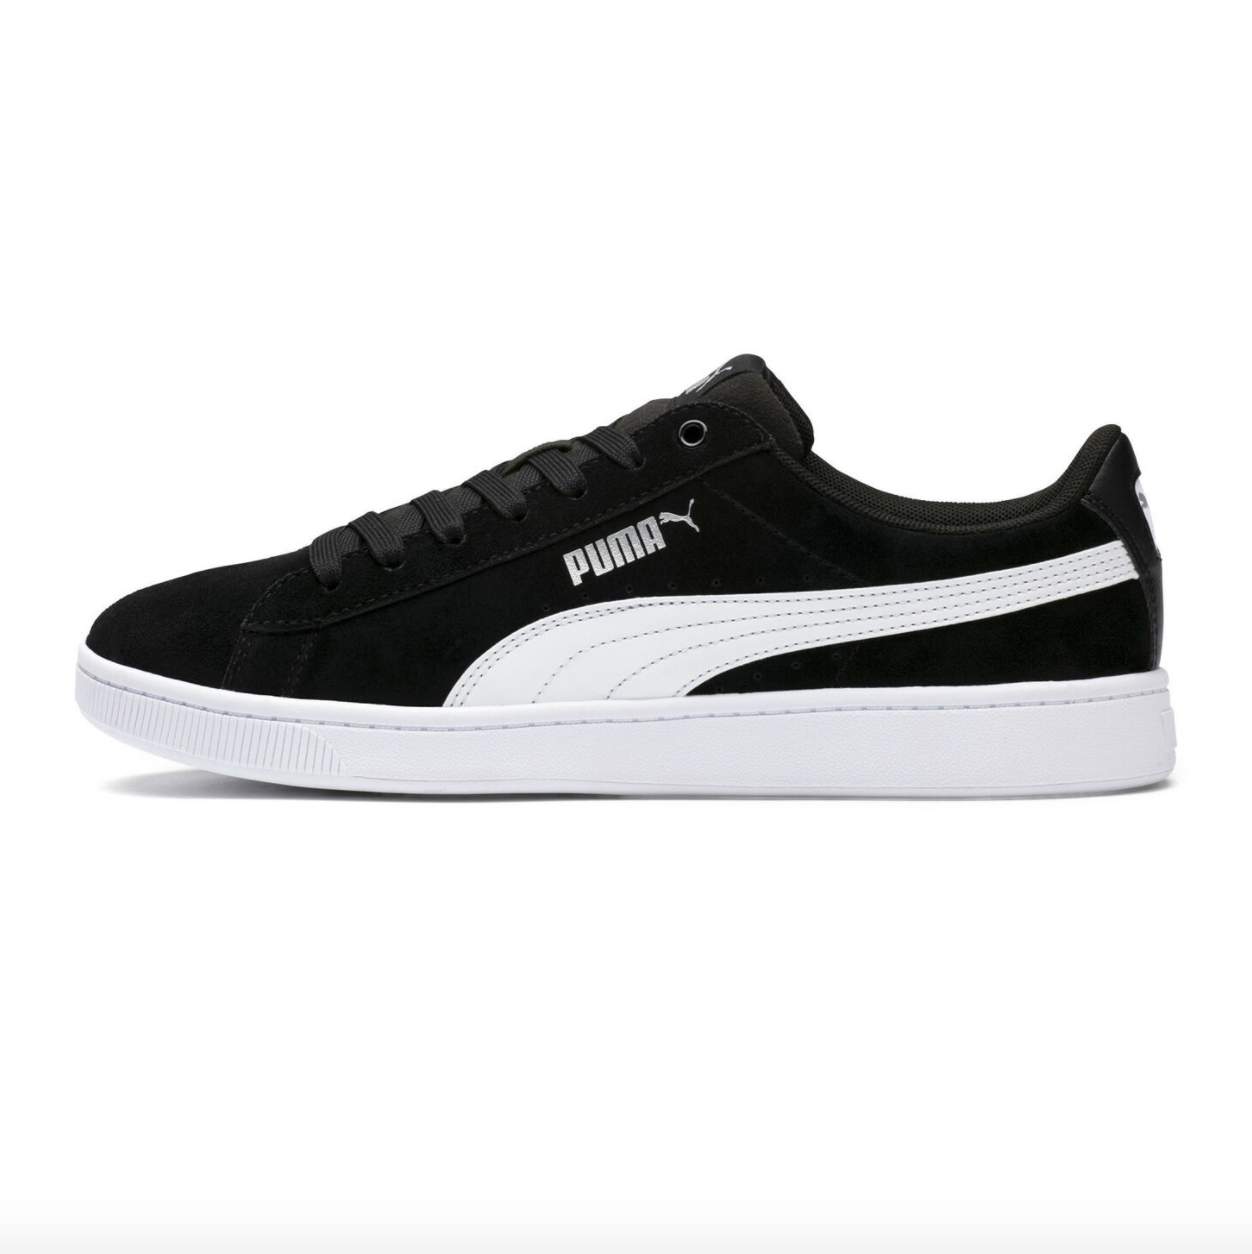 Puma Vikky V2 women's suede shoes for $23, free shipping - Clark Deals